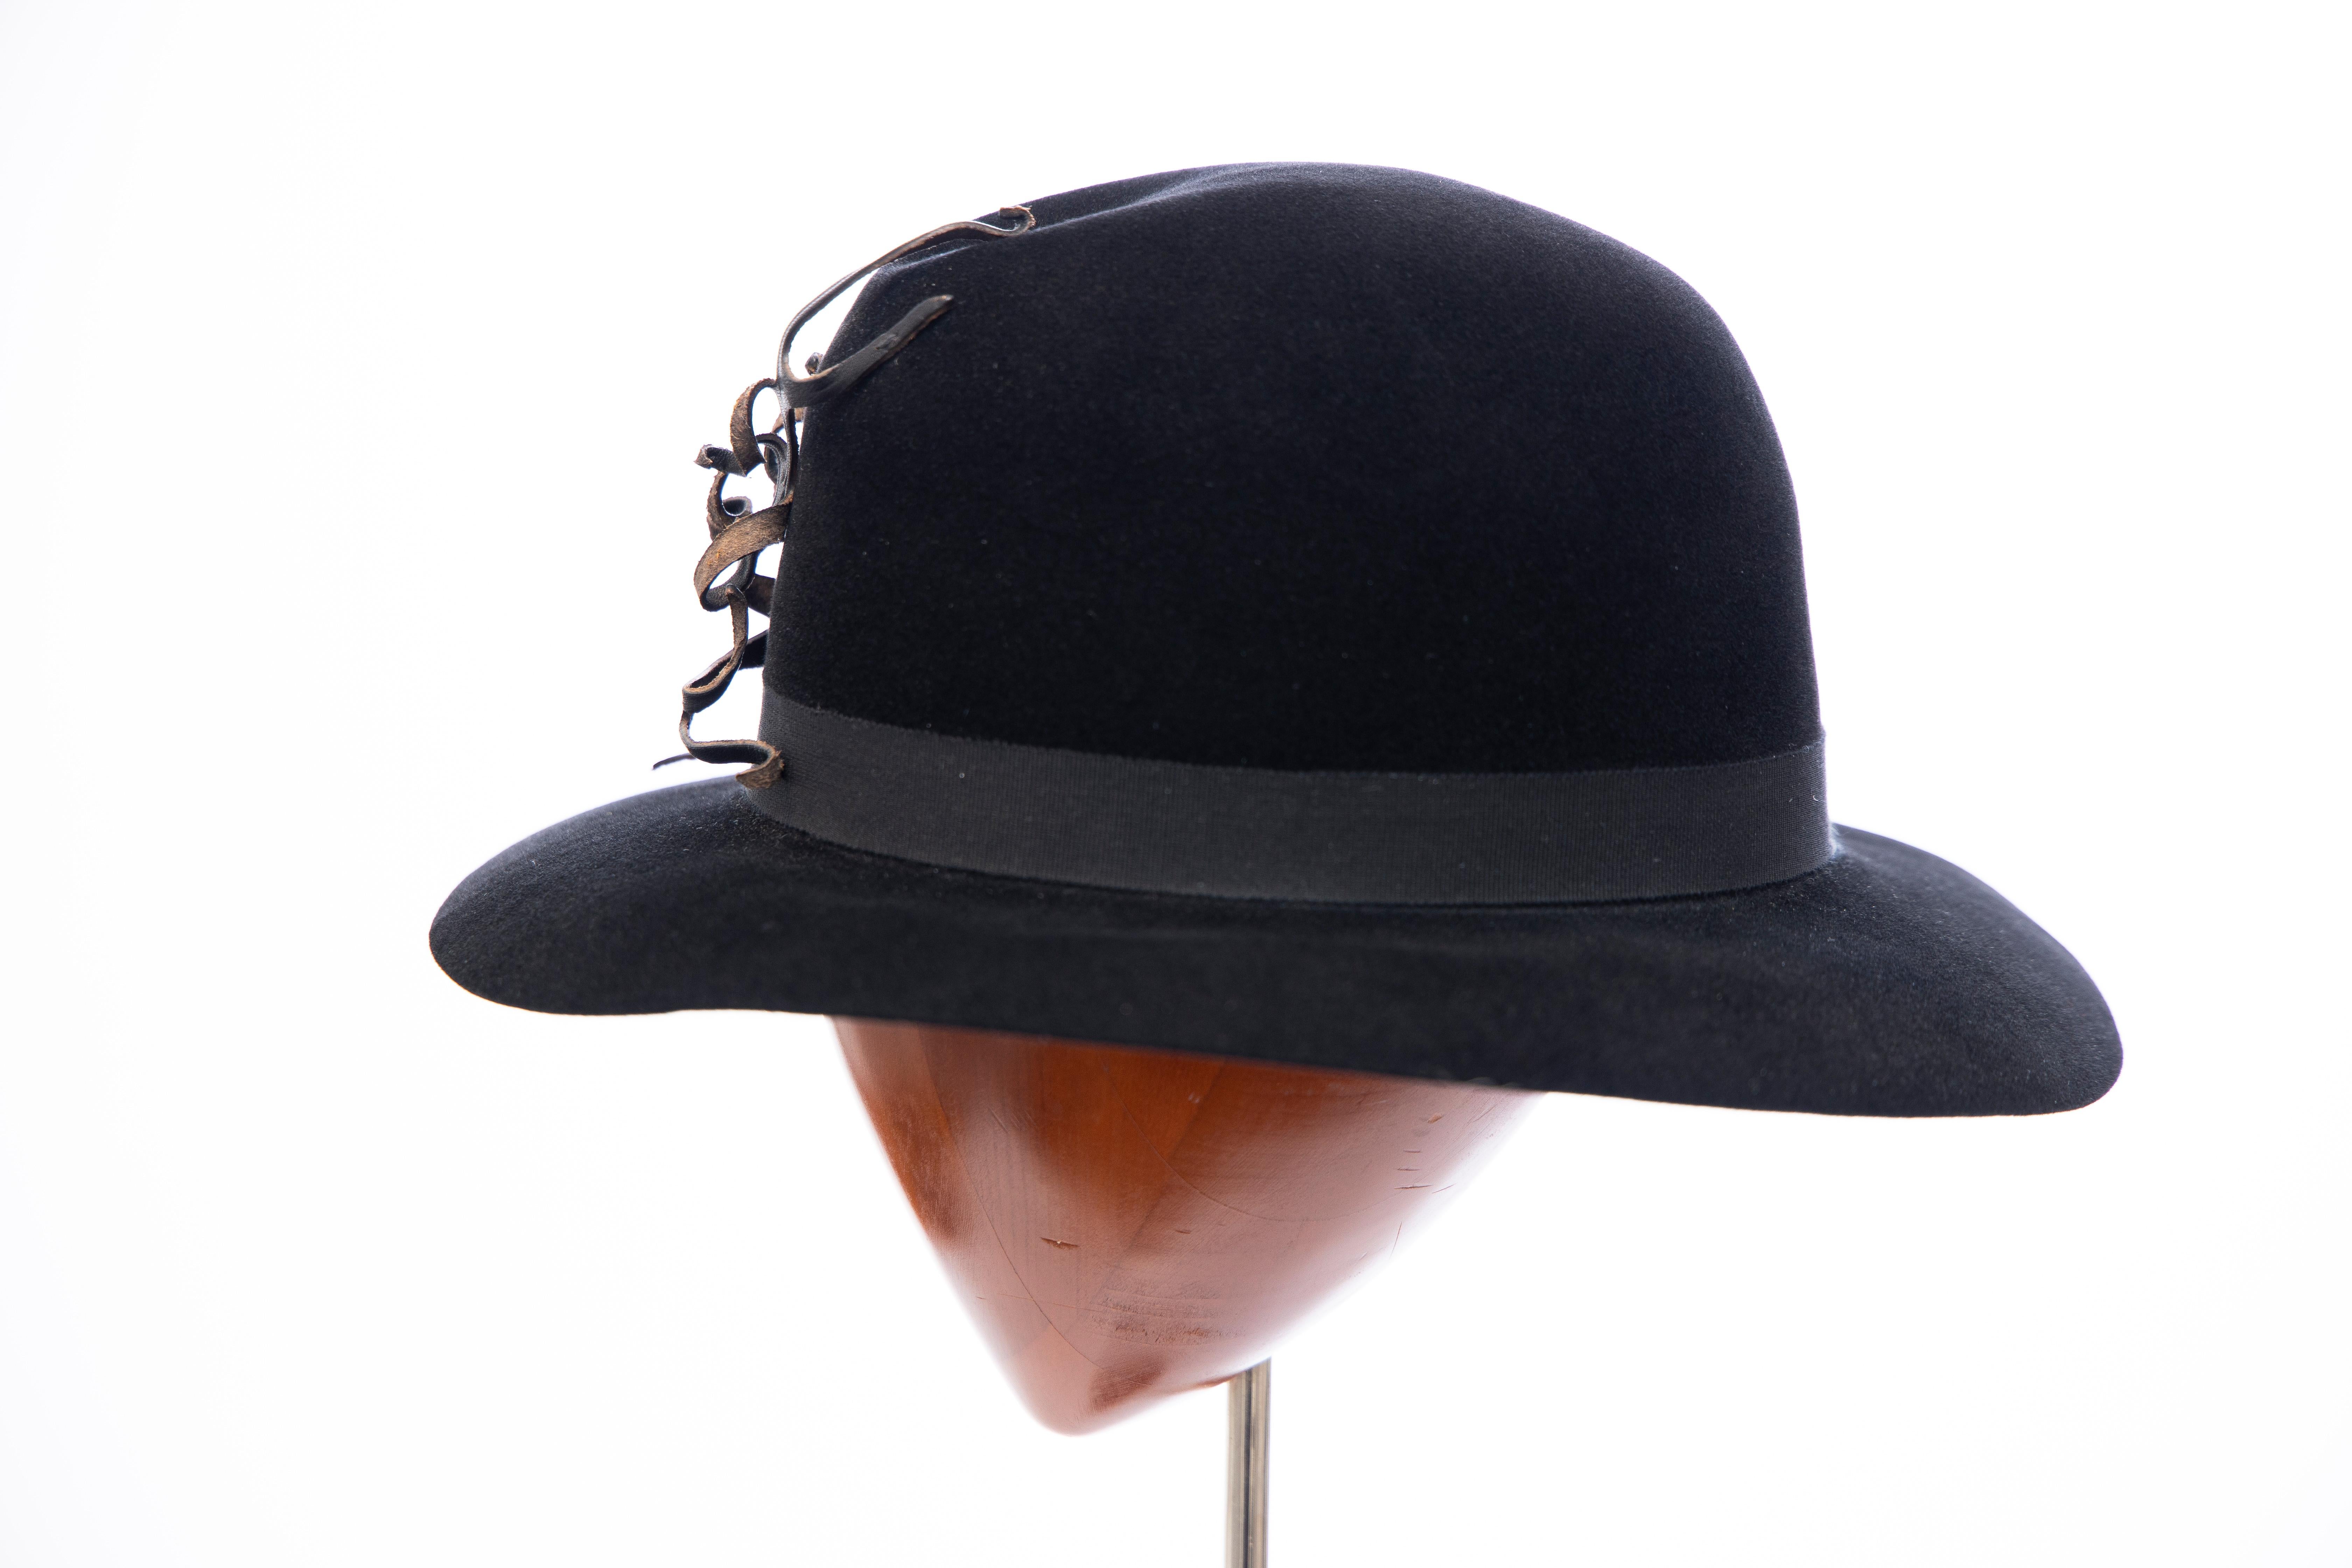 Yohji Yamamoto Pour Homme Black Wool Felt Appliquéd Leather Fedora, ca. 1990's In Excellent Condition For Sale In Cincinnati, OH